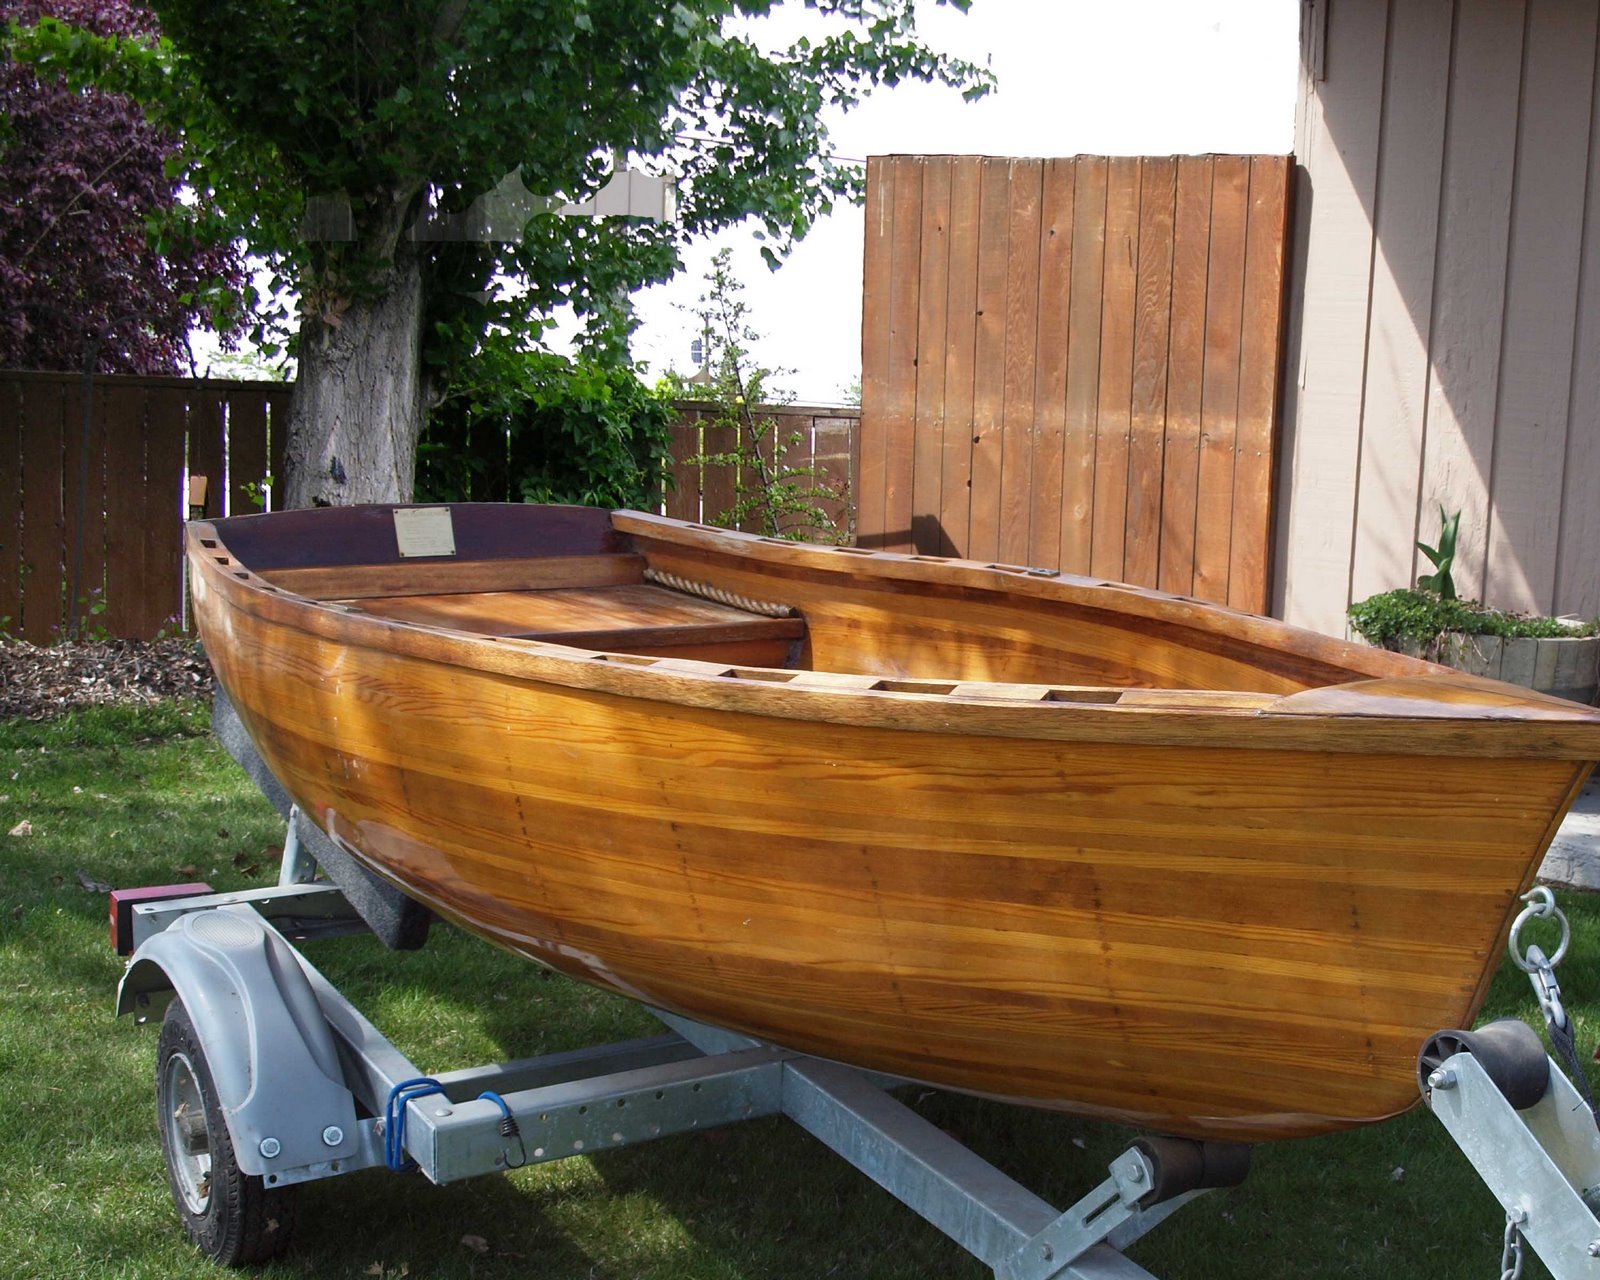 wood boat plans and kits - easy diy woodworking projects